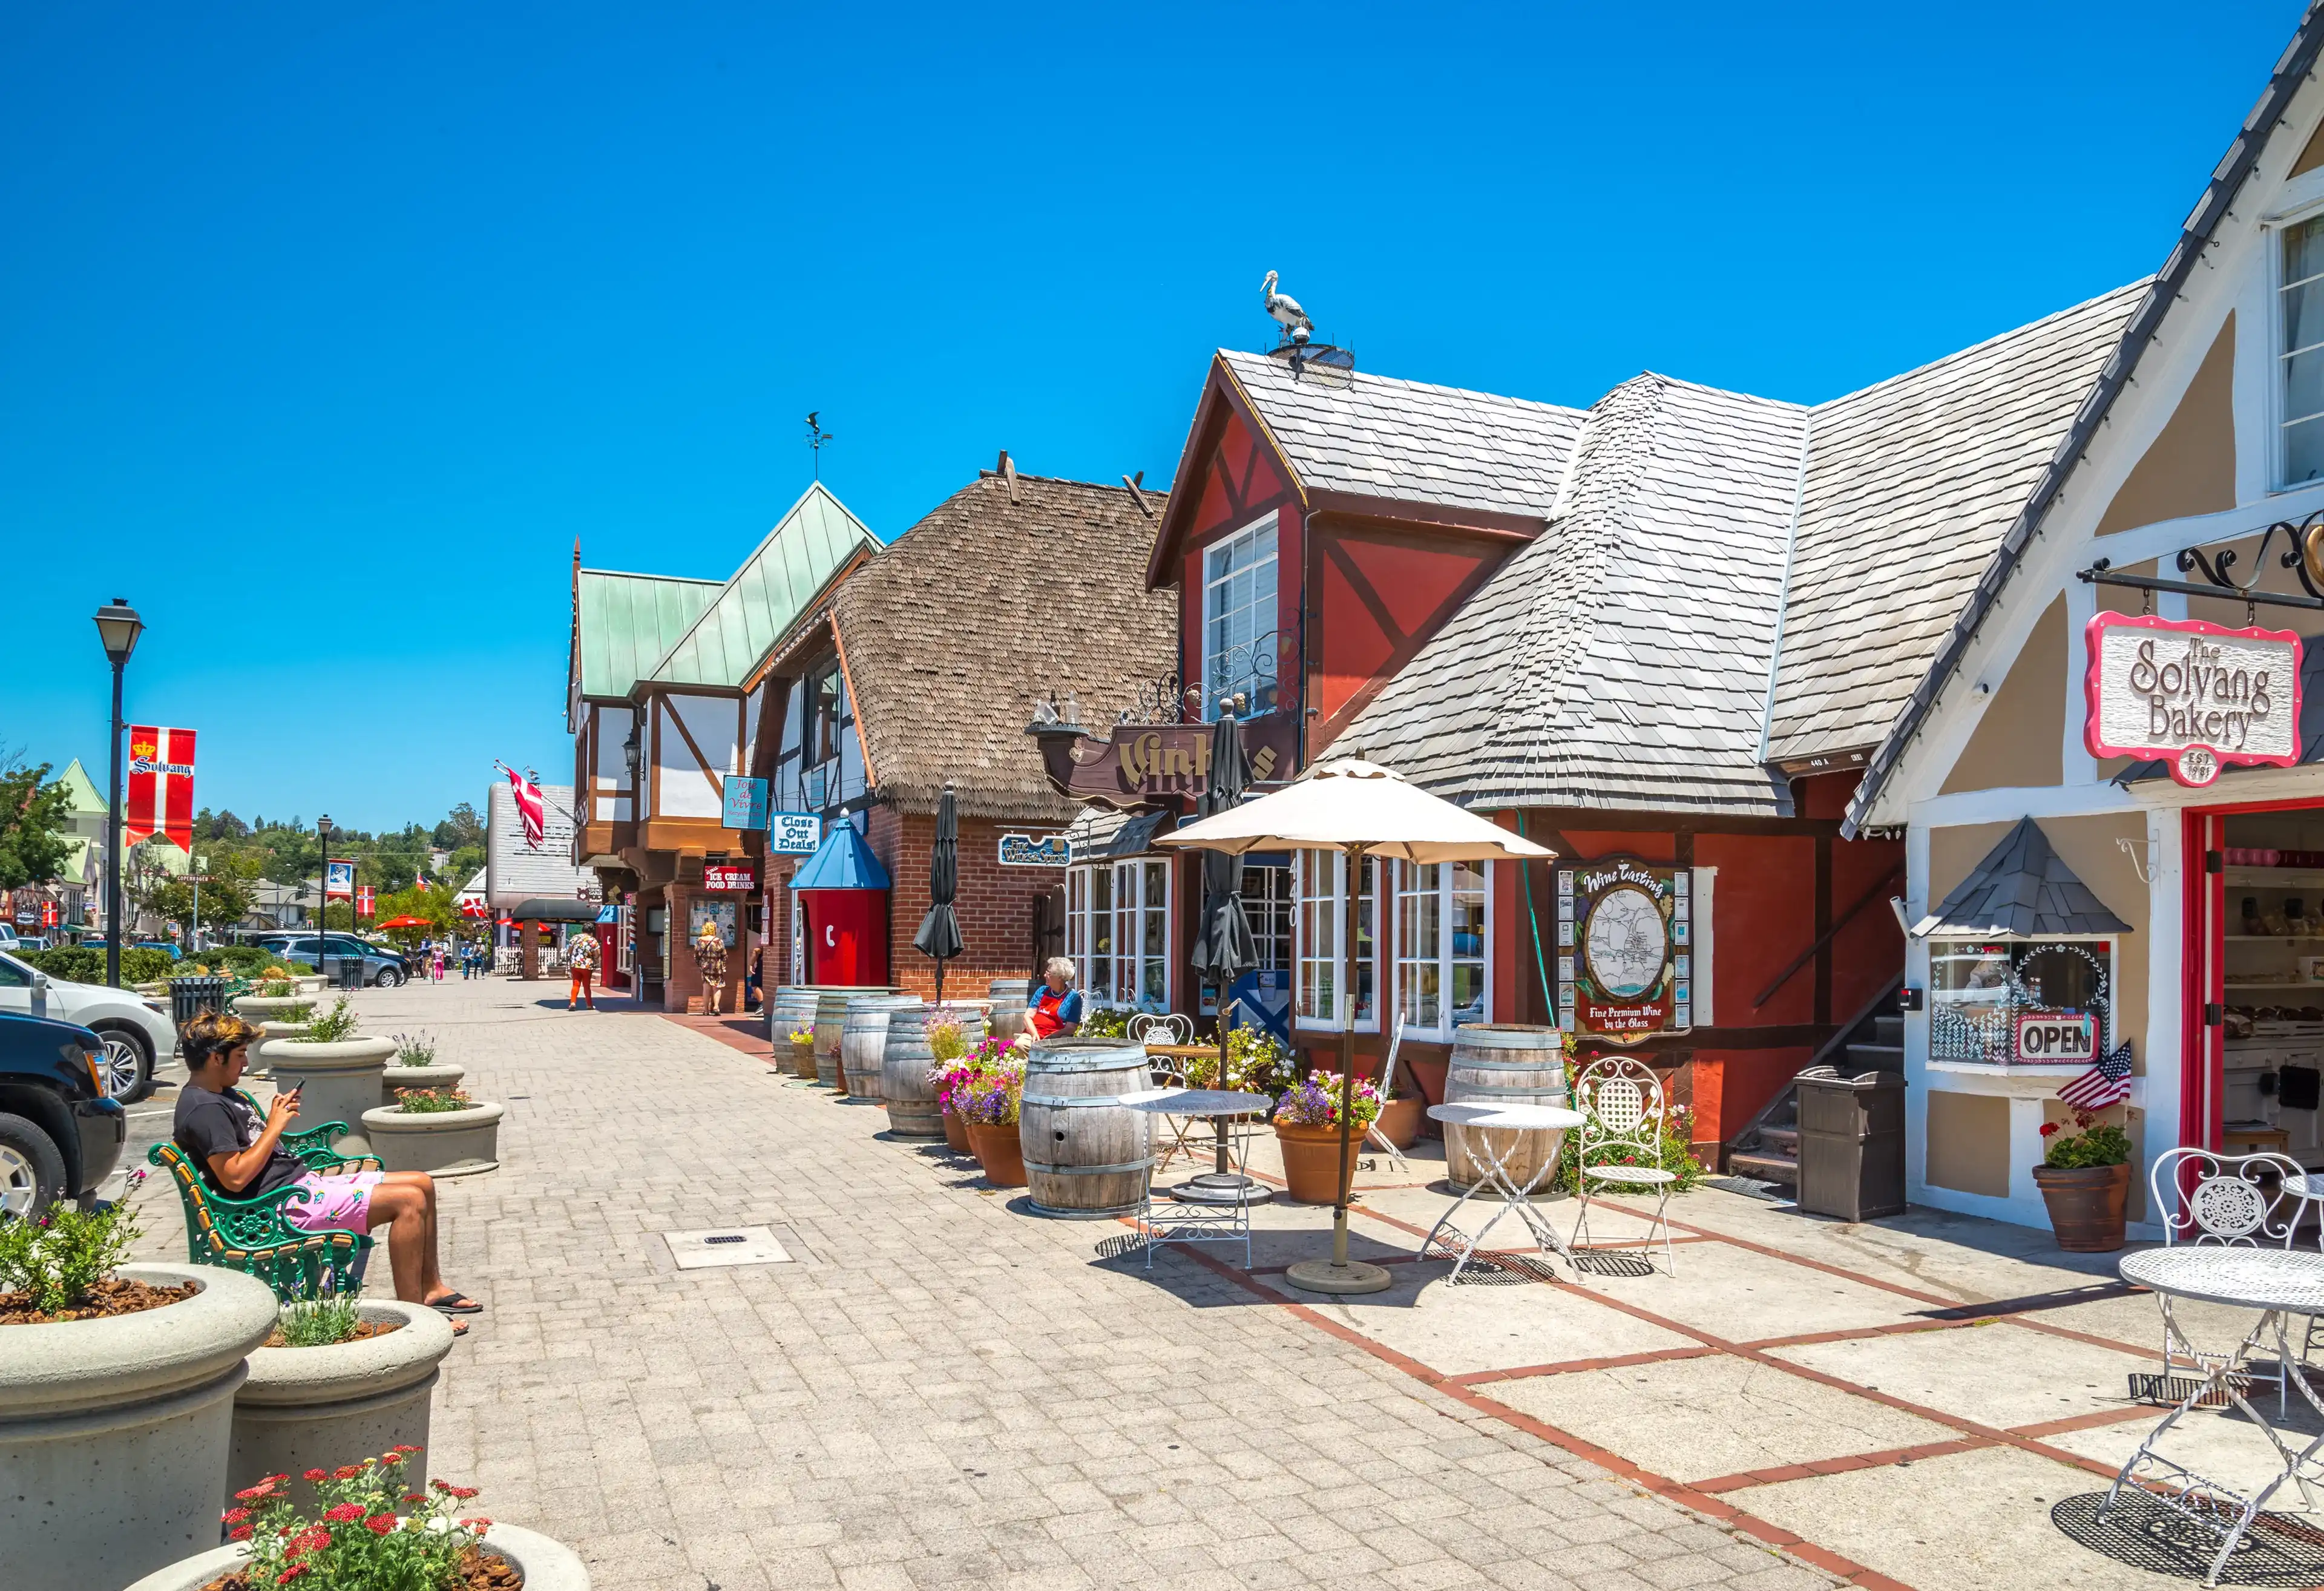 Best Solvang hotels. Cheap hotels in Solvang, California, United States